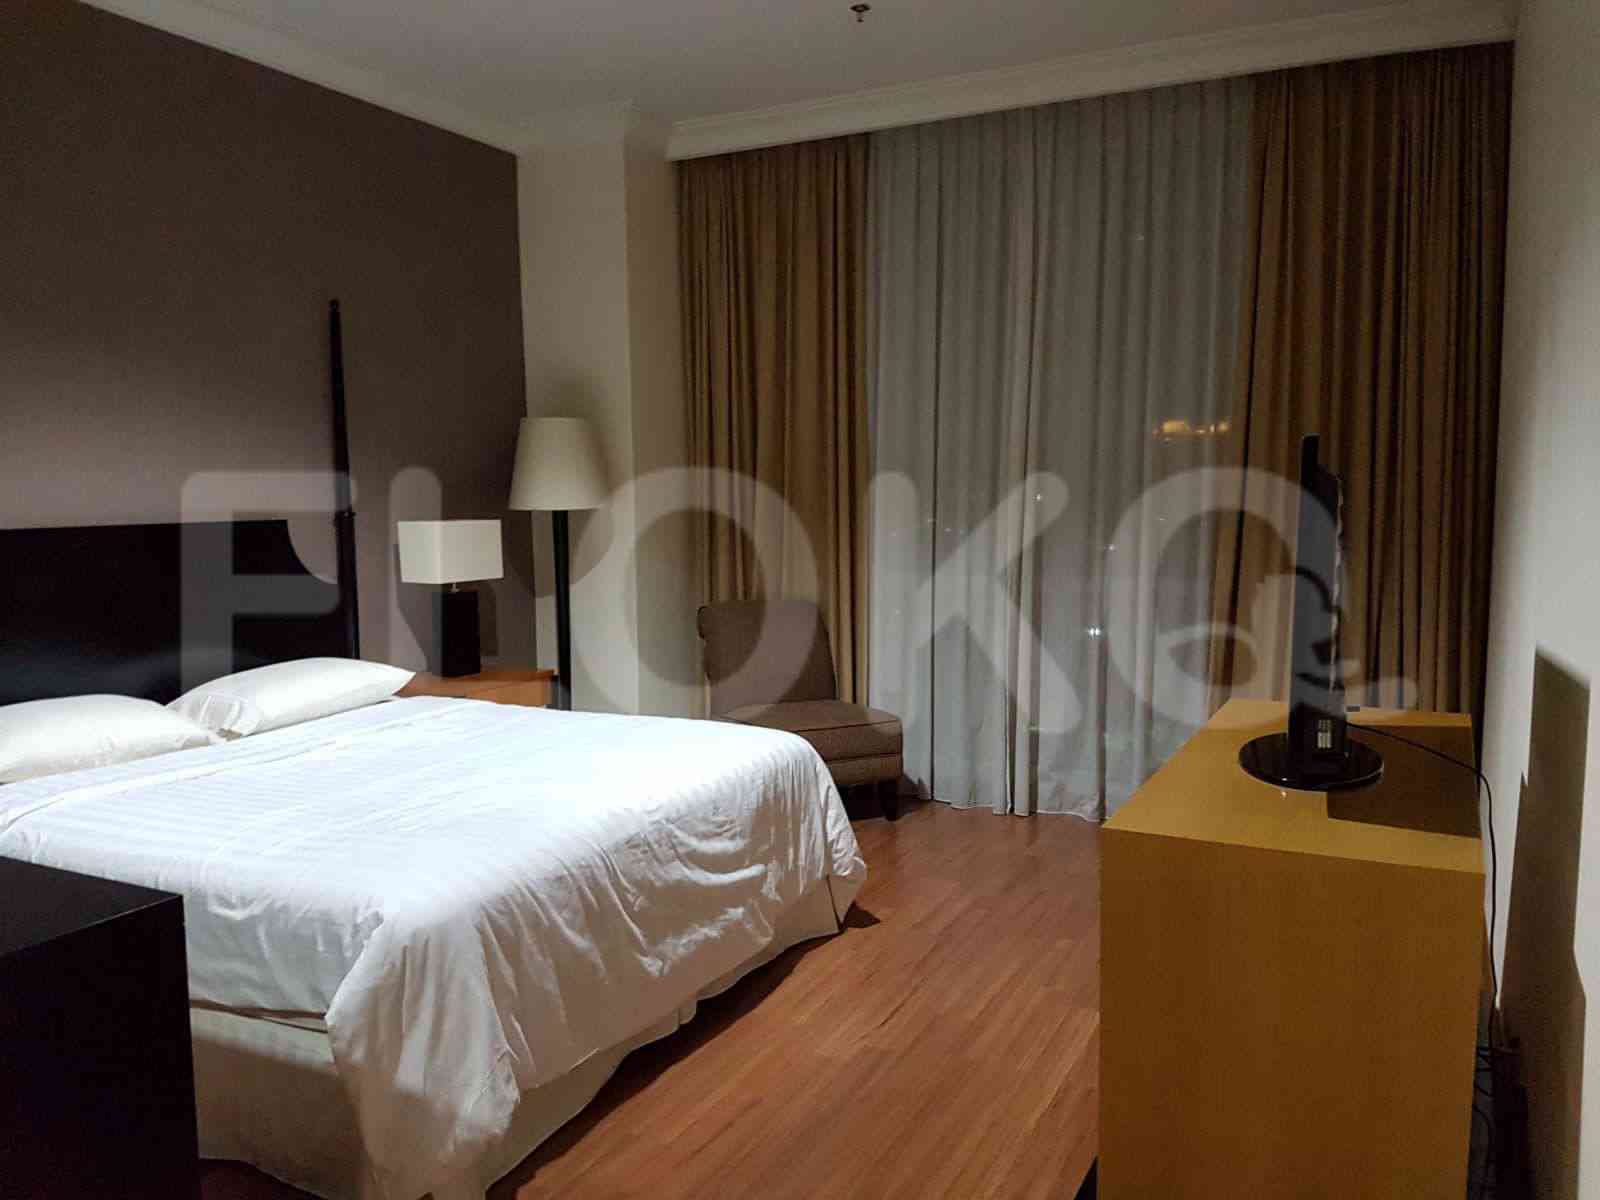 2 Bedroom on 15th Floor for Rent in Pakubuwono View - fga252 5